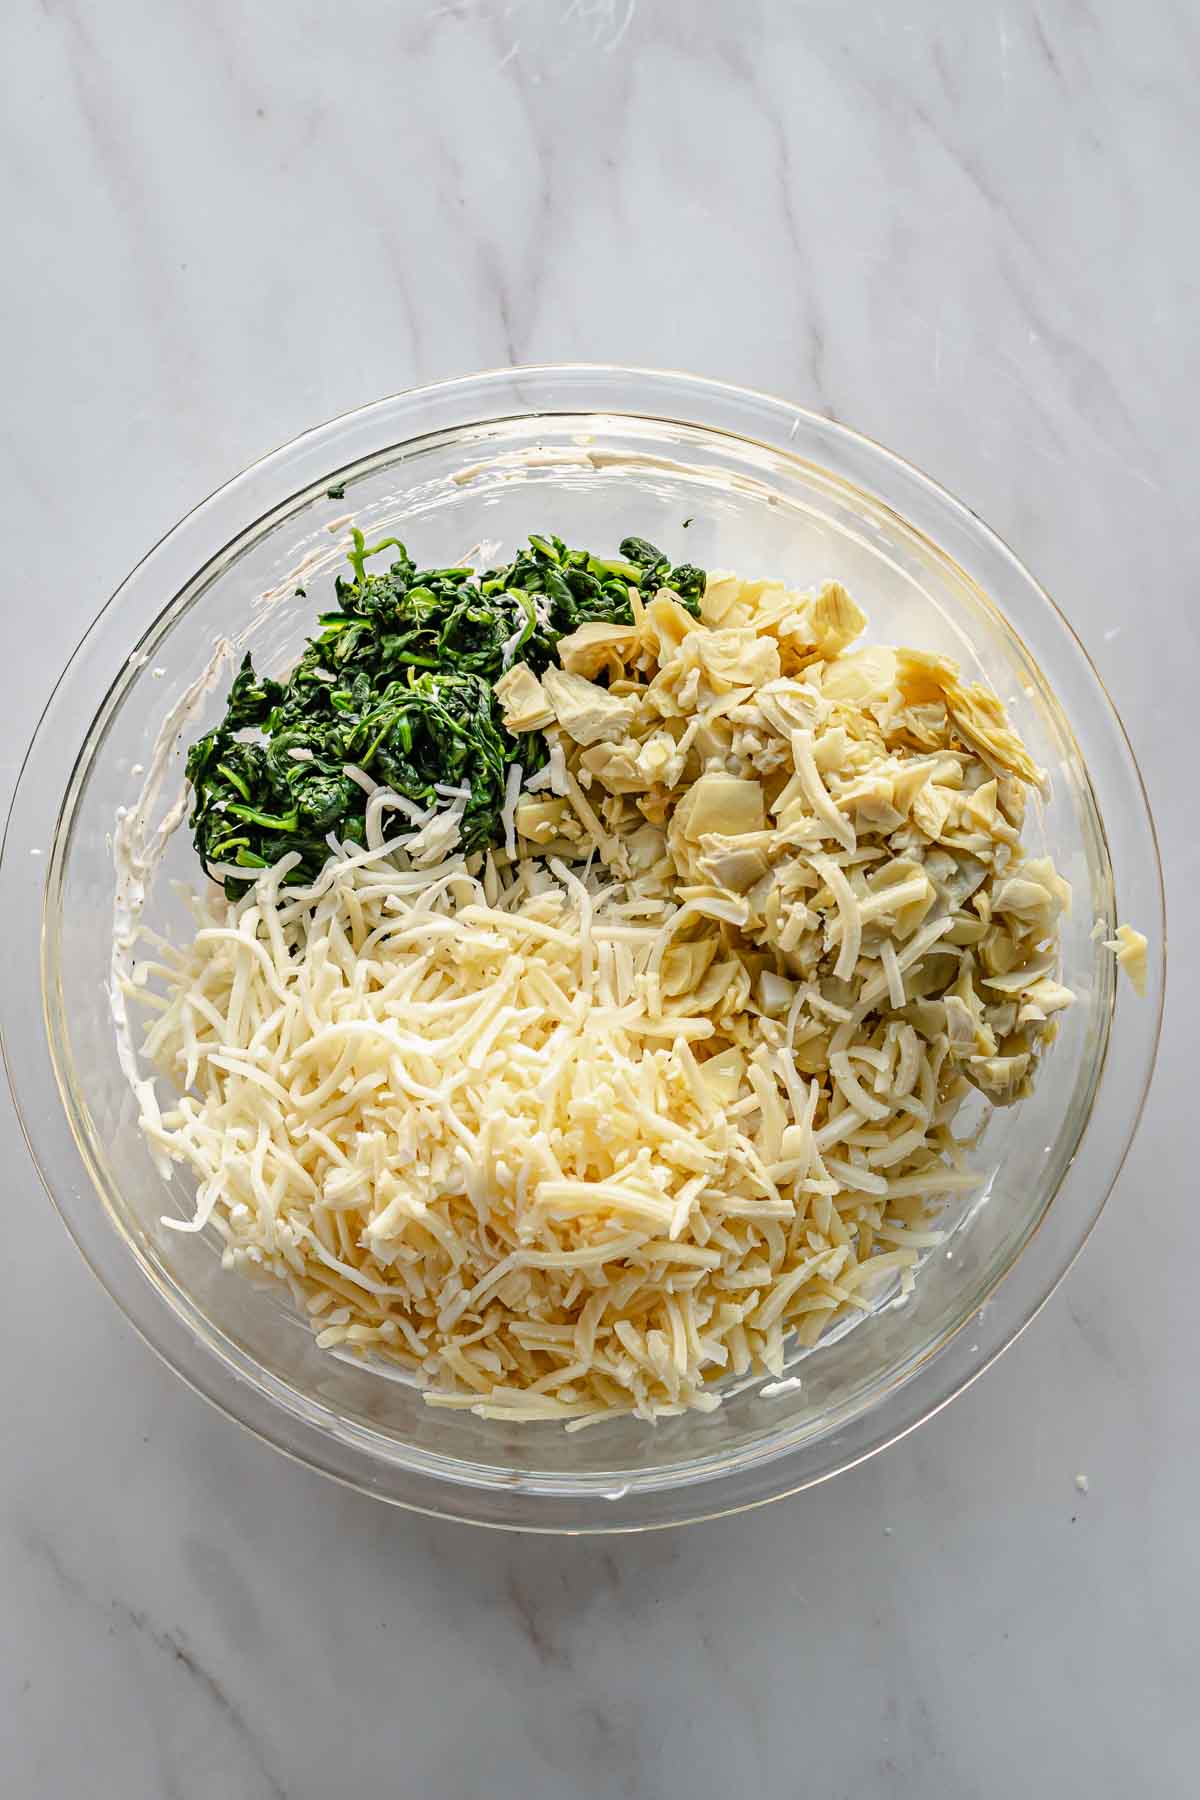 Cheeses, chopped artichokes, and chopped spinach in a bowl.